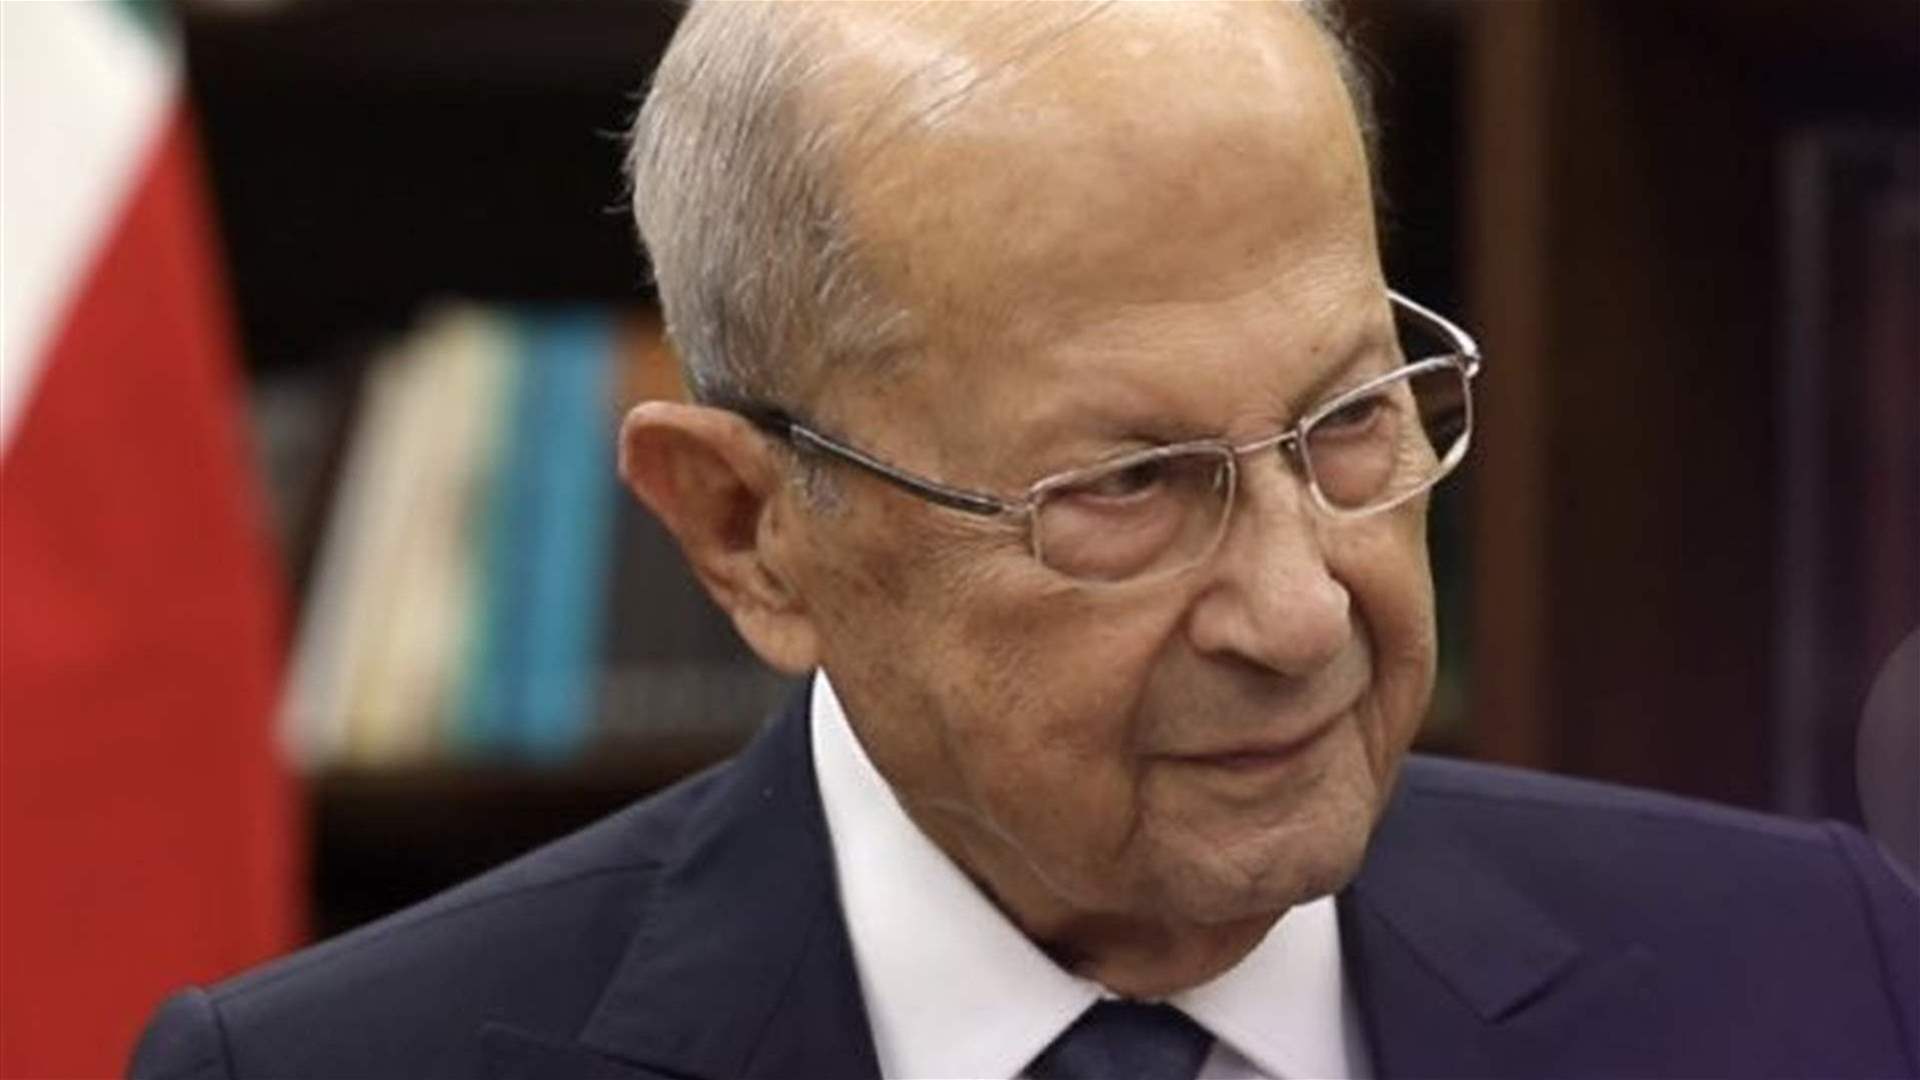 Aoun: The ruling system trying to conceal forensic audit report because it incriminates them